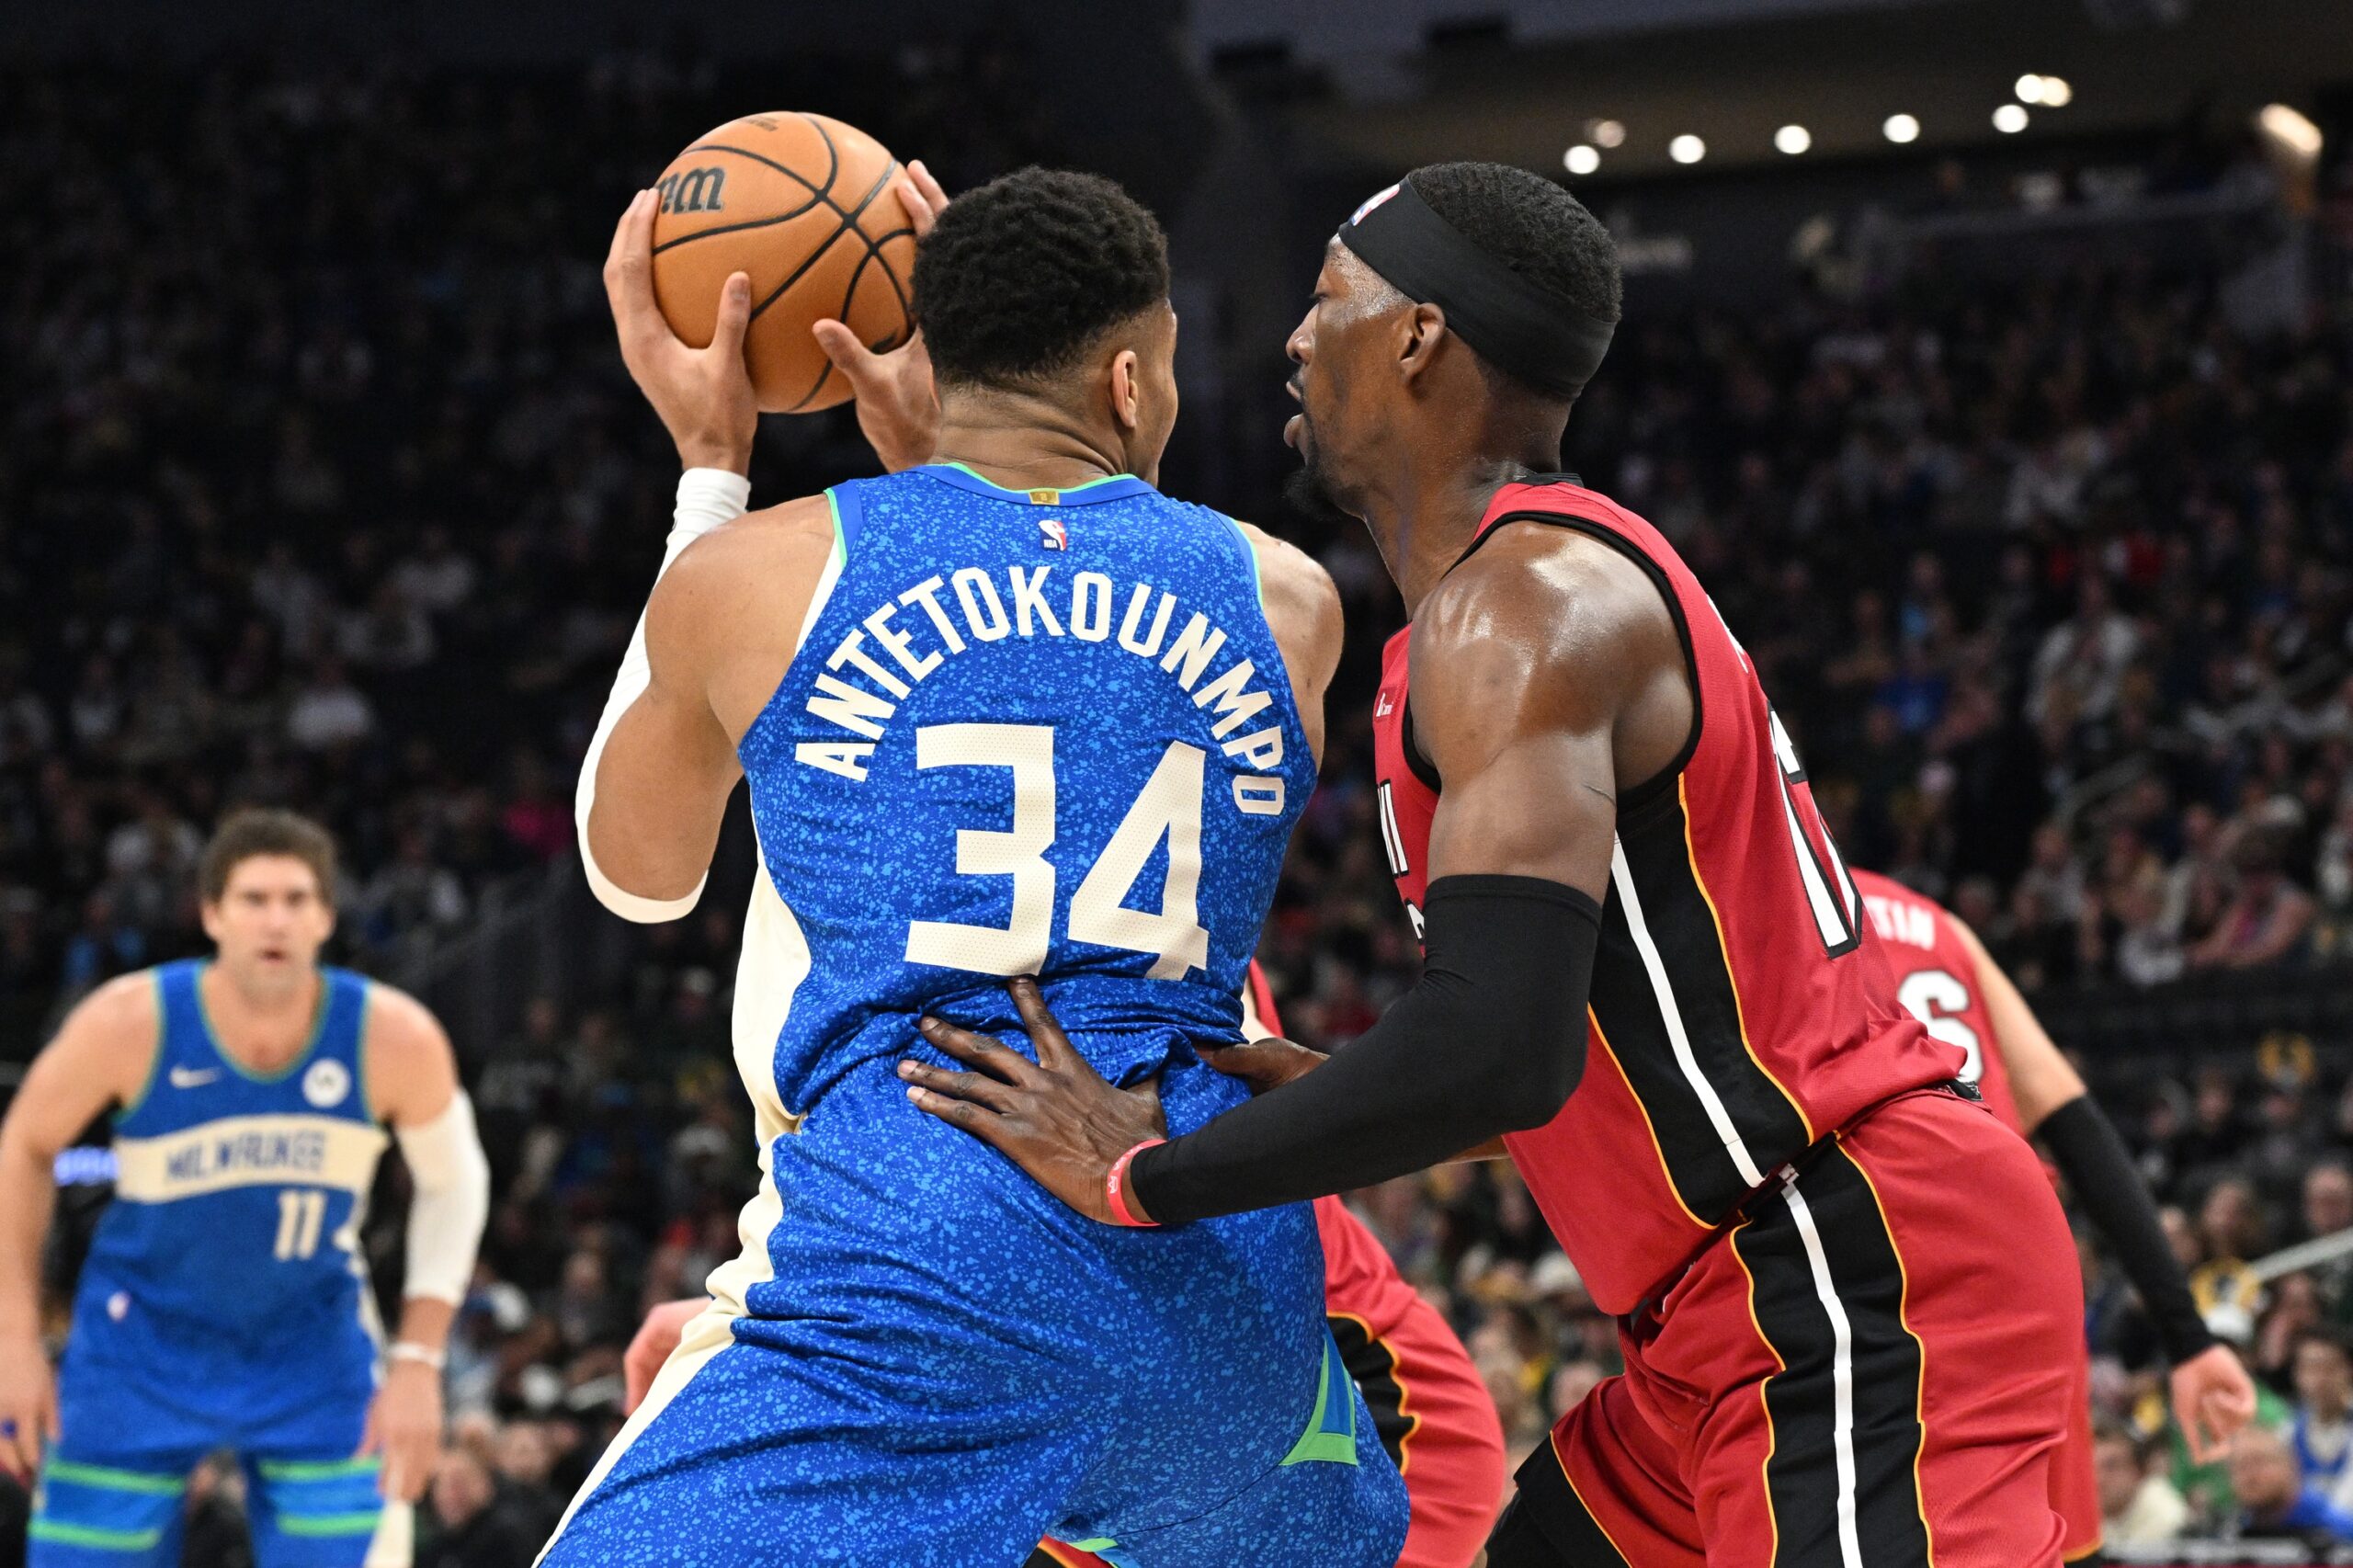 Bam Adebayo and Giannis Antetokounmpo are two of the NBA's best defenders.